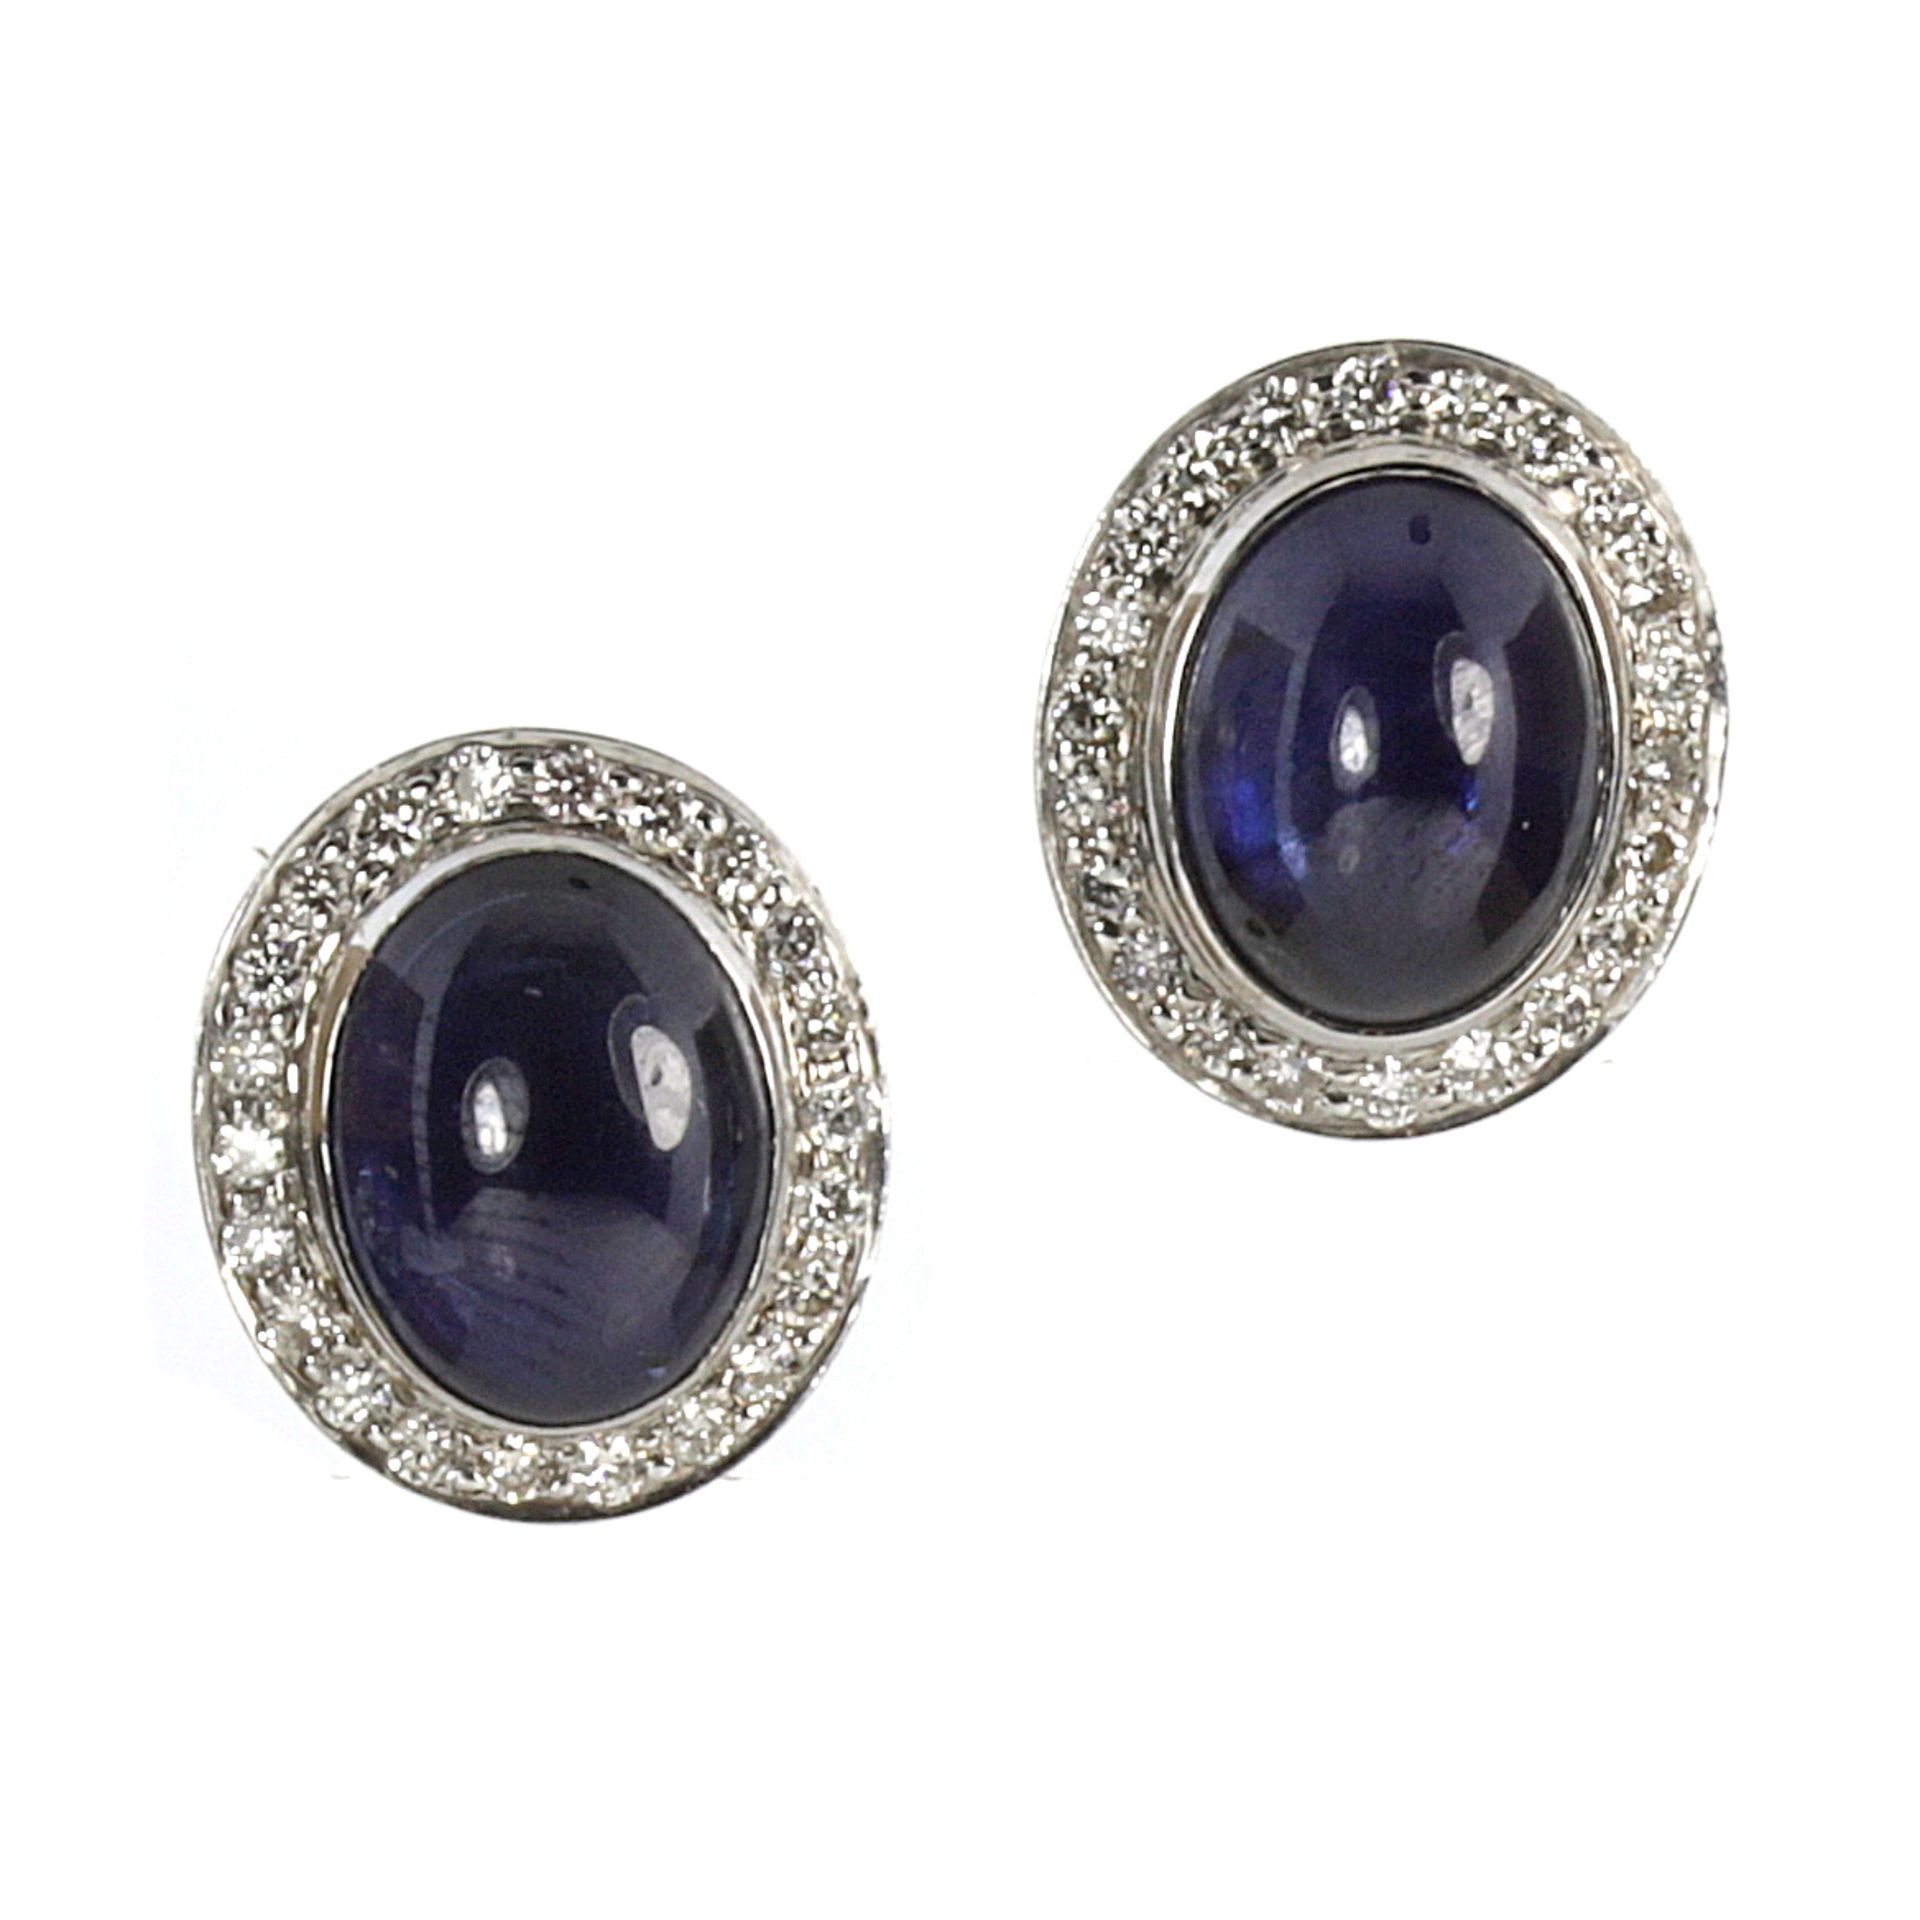 A PAIR OF BLUE SAPPHIRE AND DIAMOND CLUSTER EARRINGS in white gold or platinum, each set with an